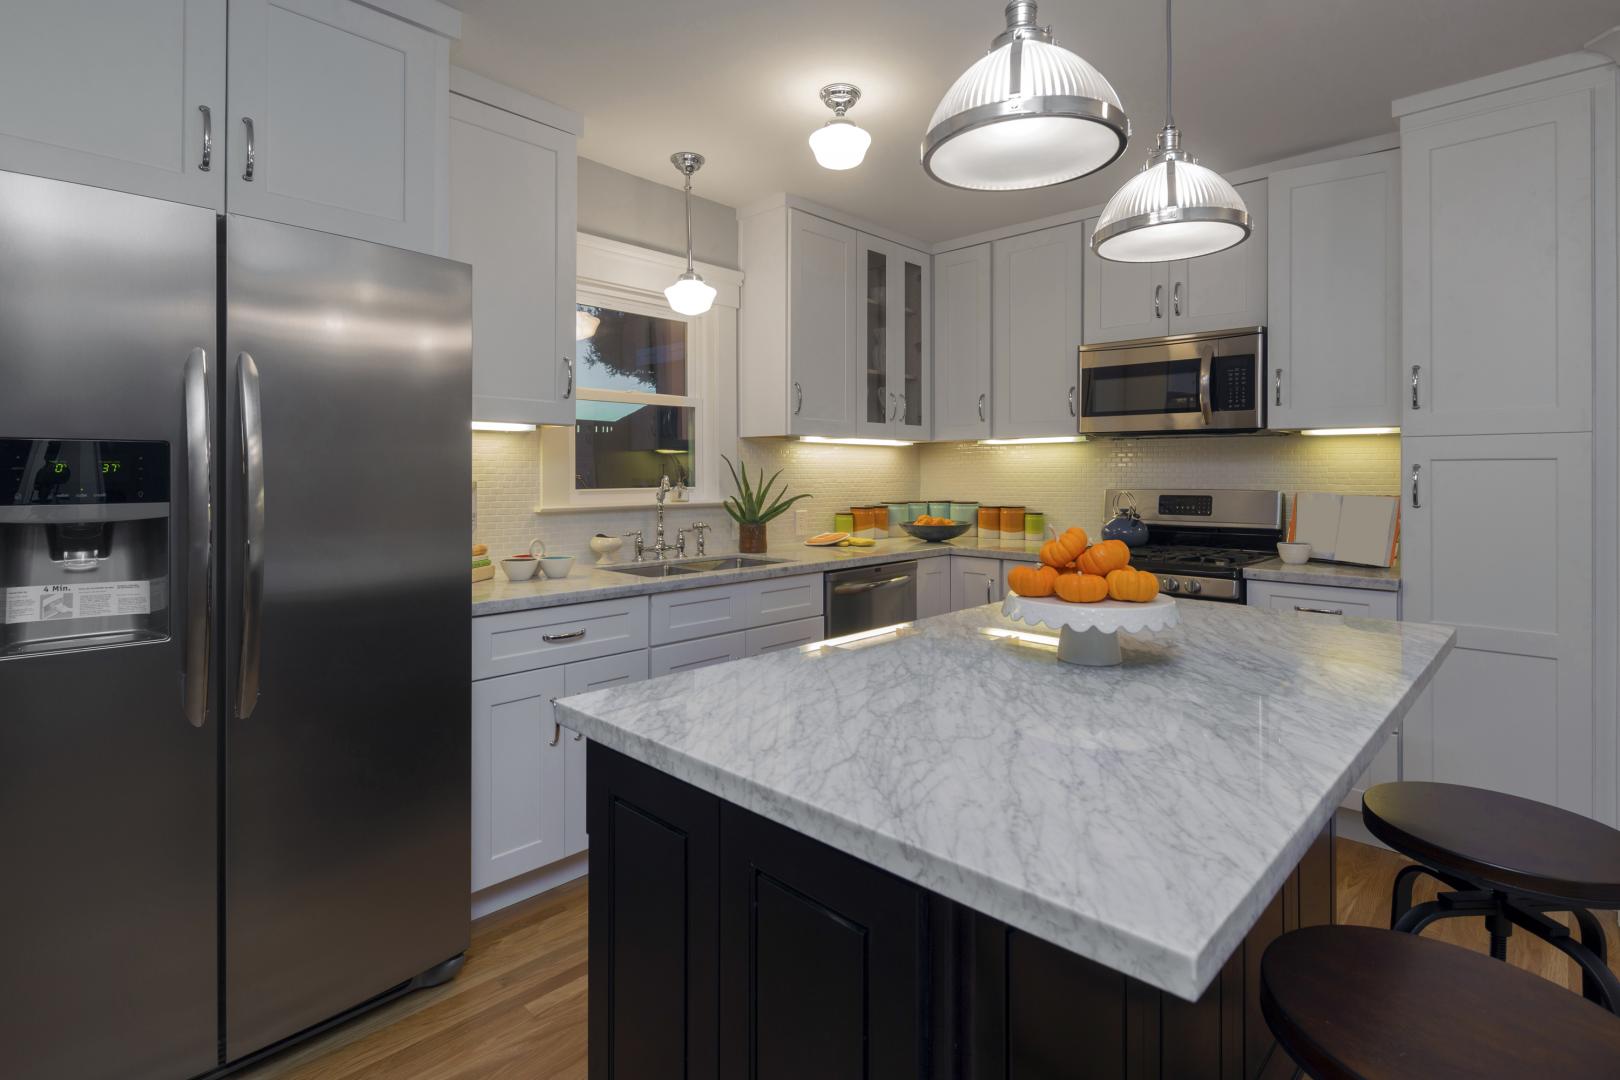 kitchen and bath remodeling nassau county in lynbrook